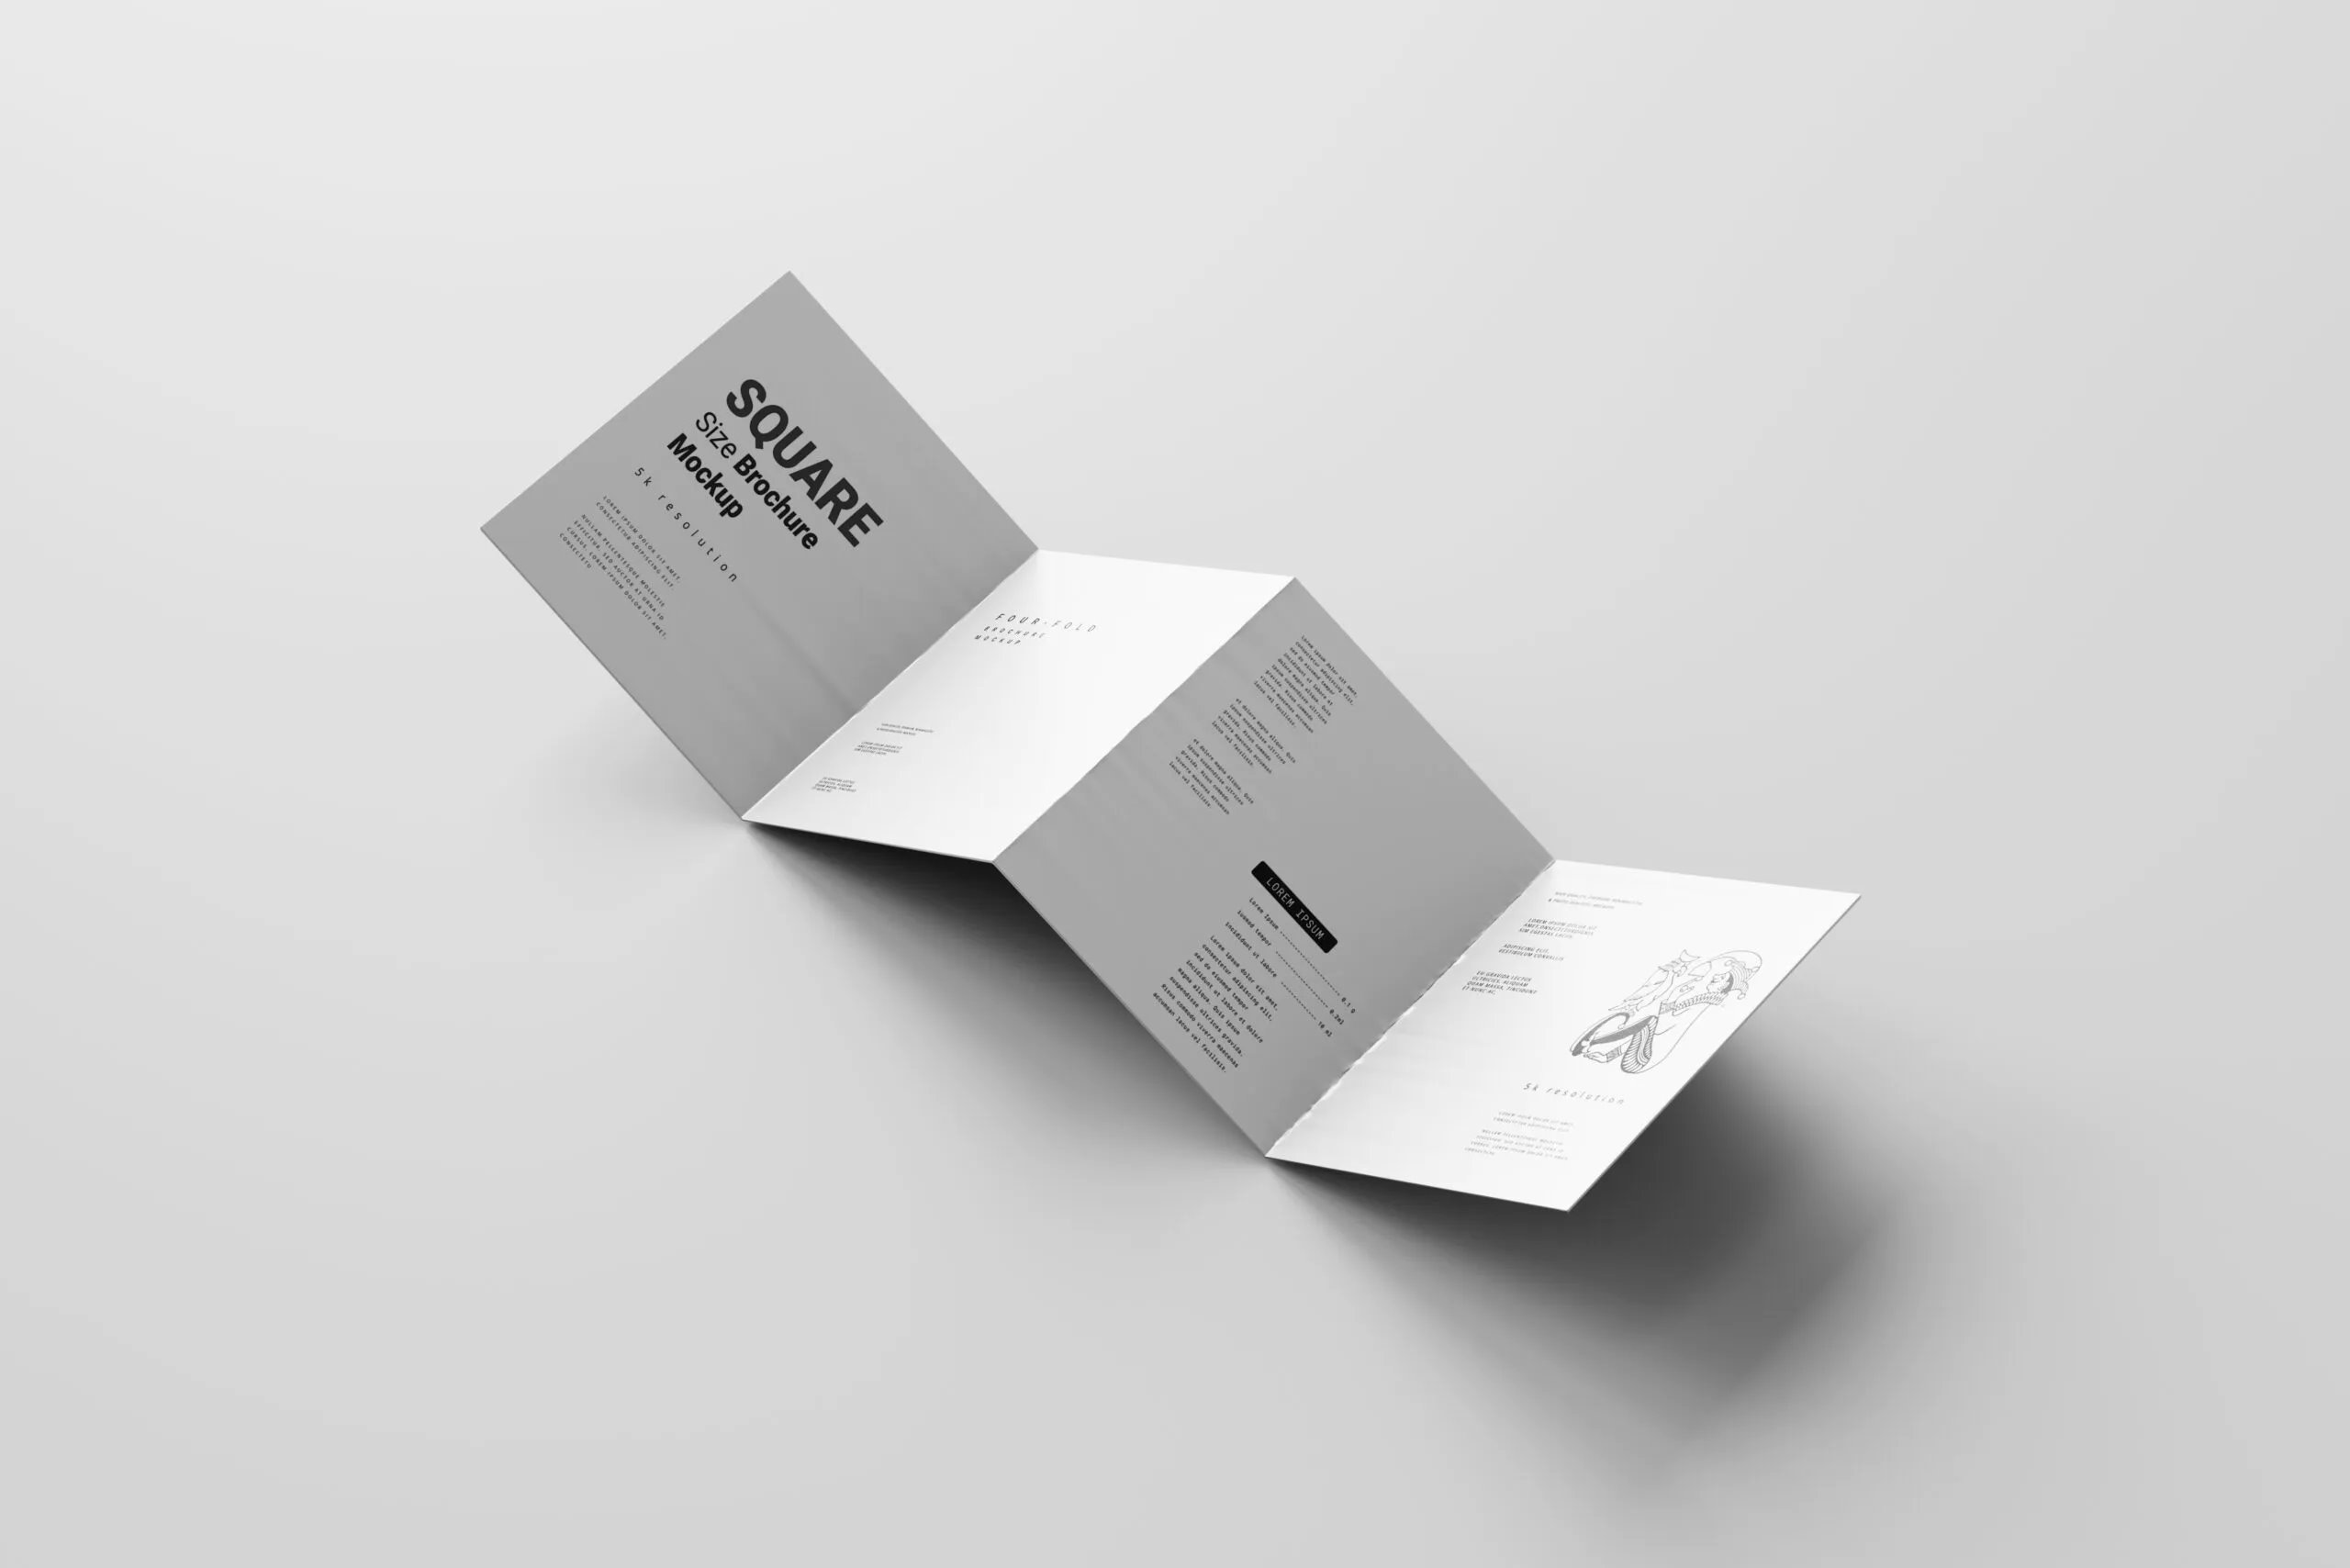 5 Mockups of 4 Fold Square Brochures in Varied Sights FREE PSD